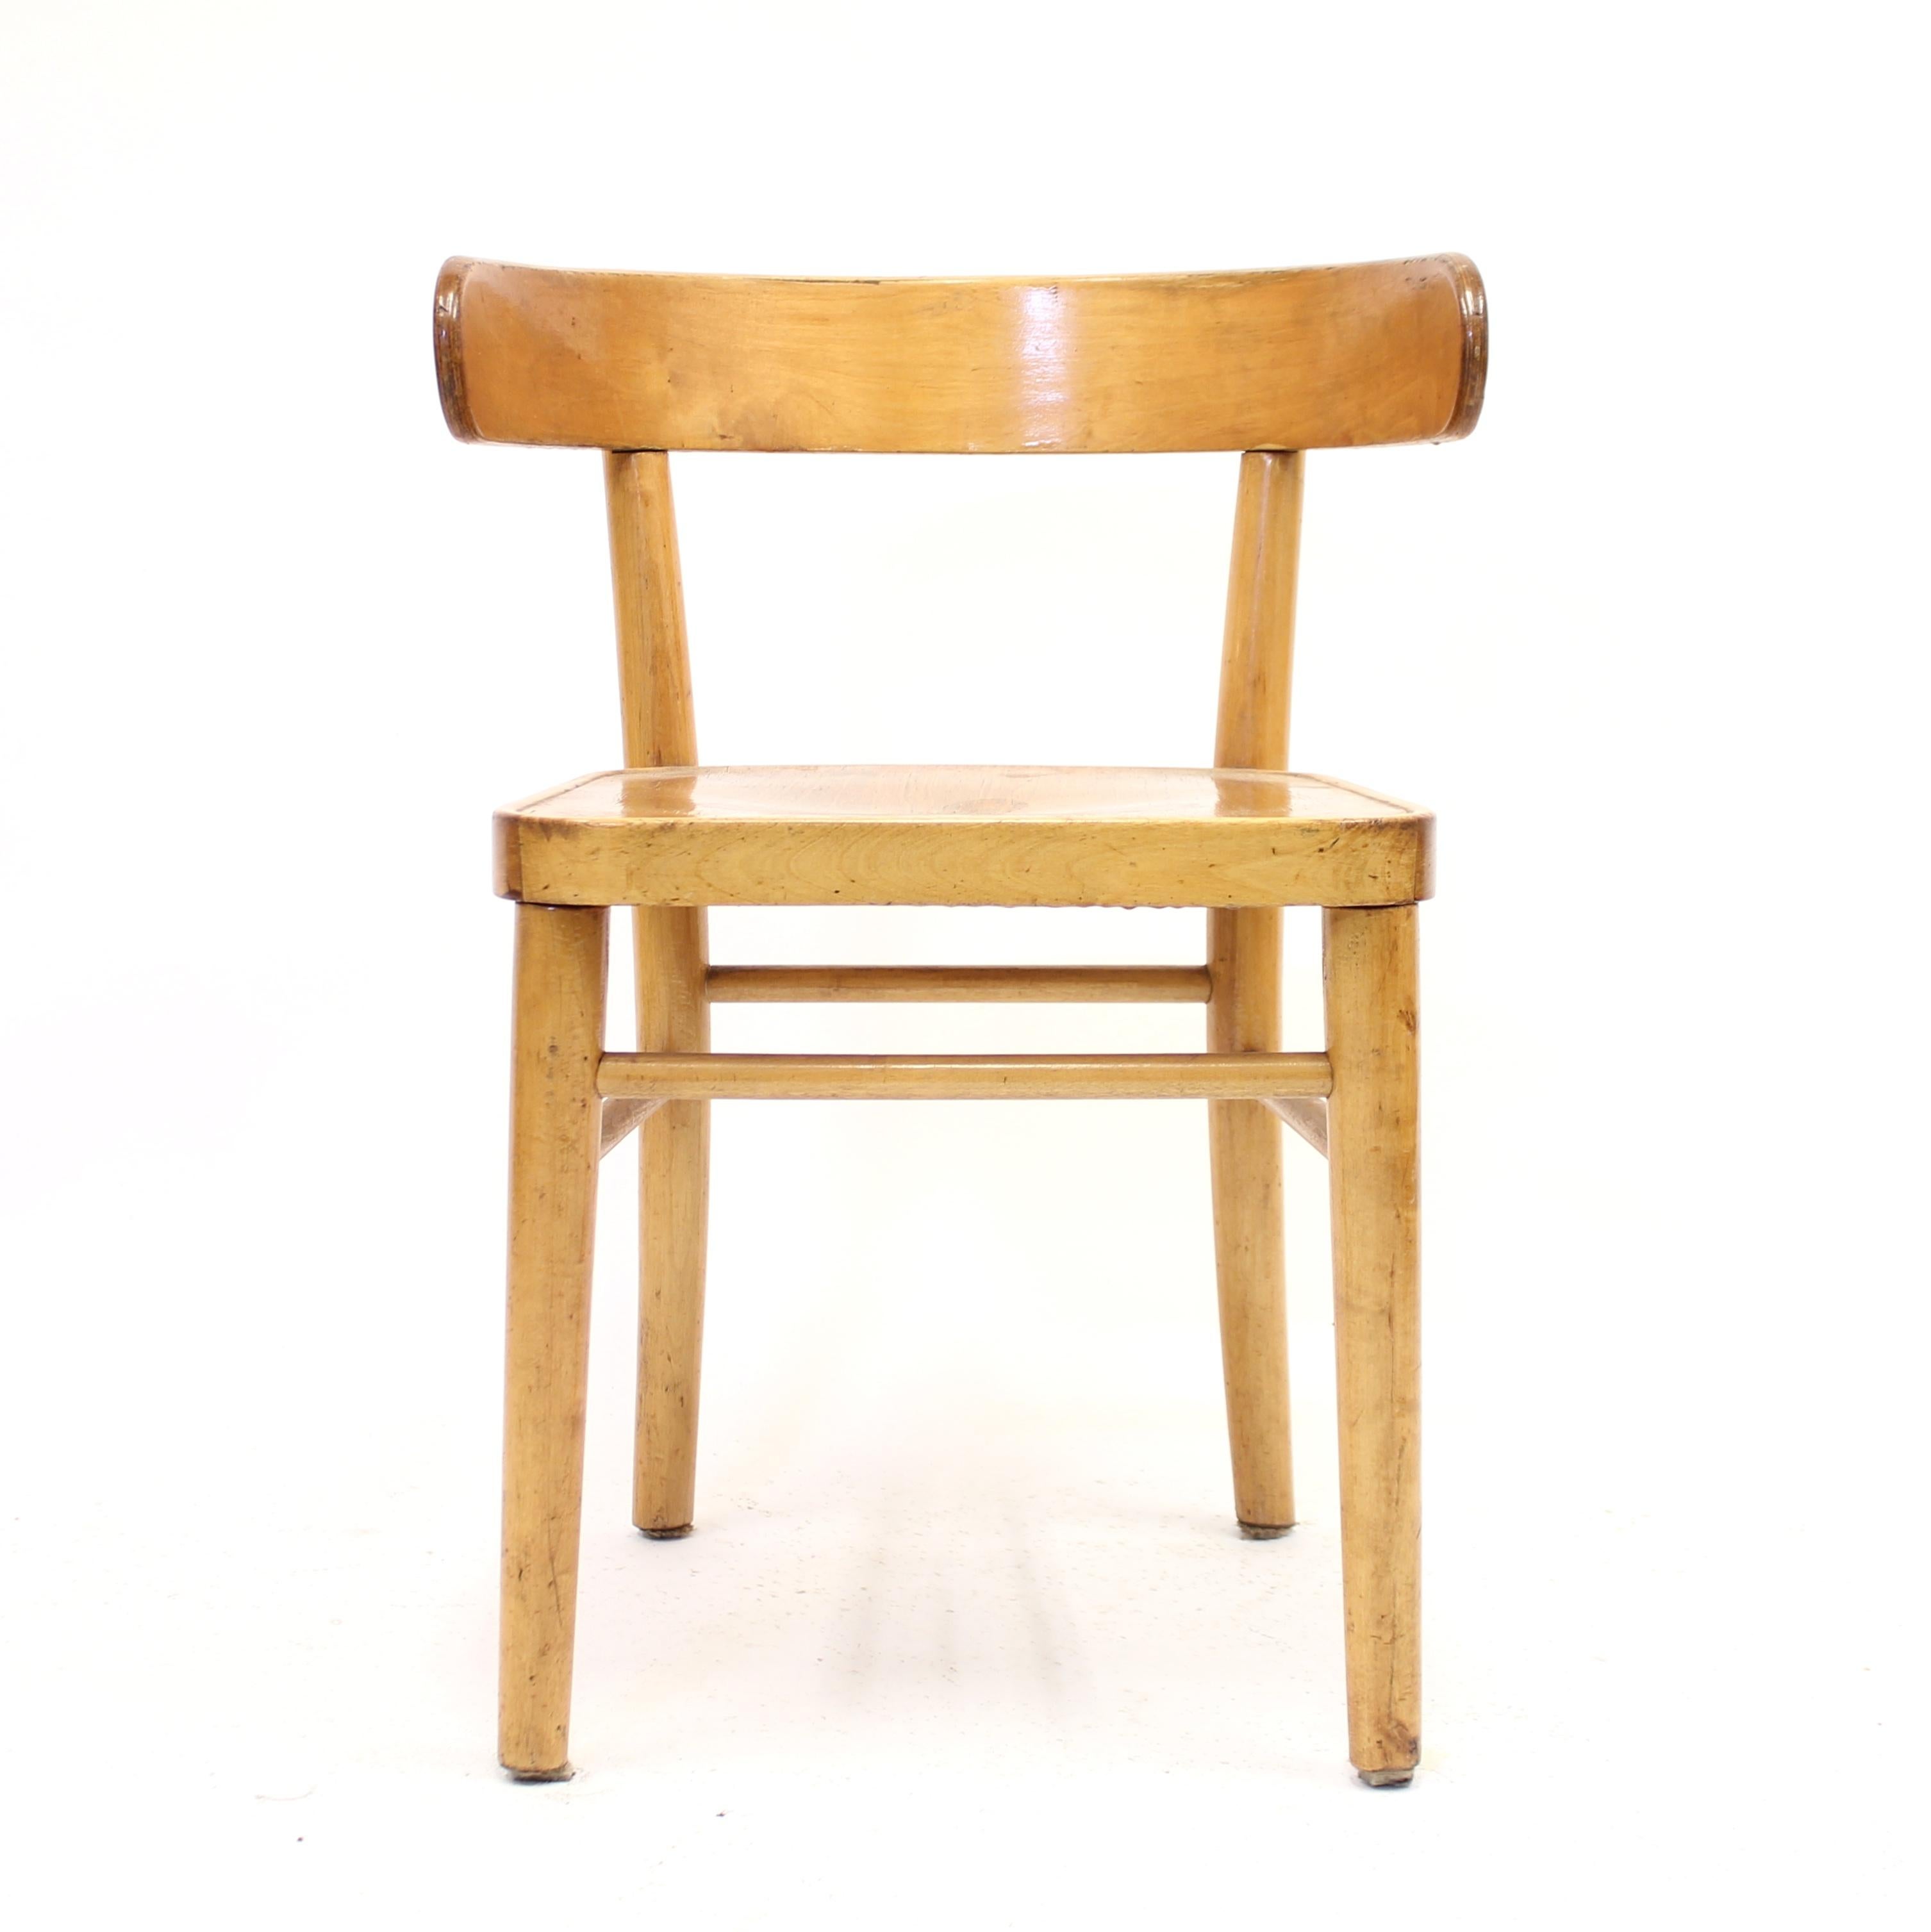 A so called Hugging chair designed by Finish designer Werner West in the 1940s and manufactured by Wilhelm Schauman in the town Jyväskyle in the middle of Finland. The design of the back is heavily inspired by the Greek Klismos chairs. The frame is